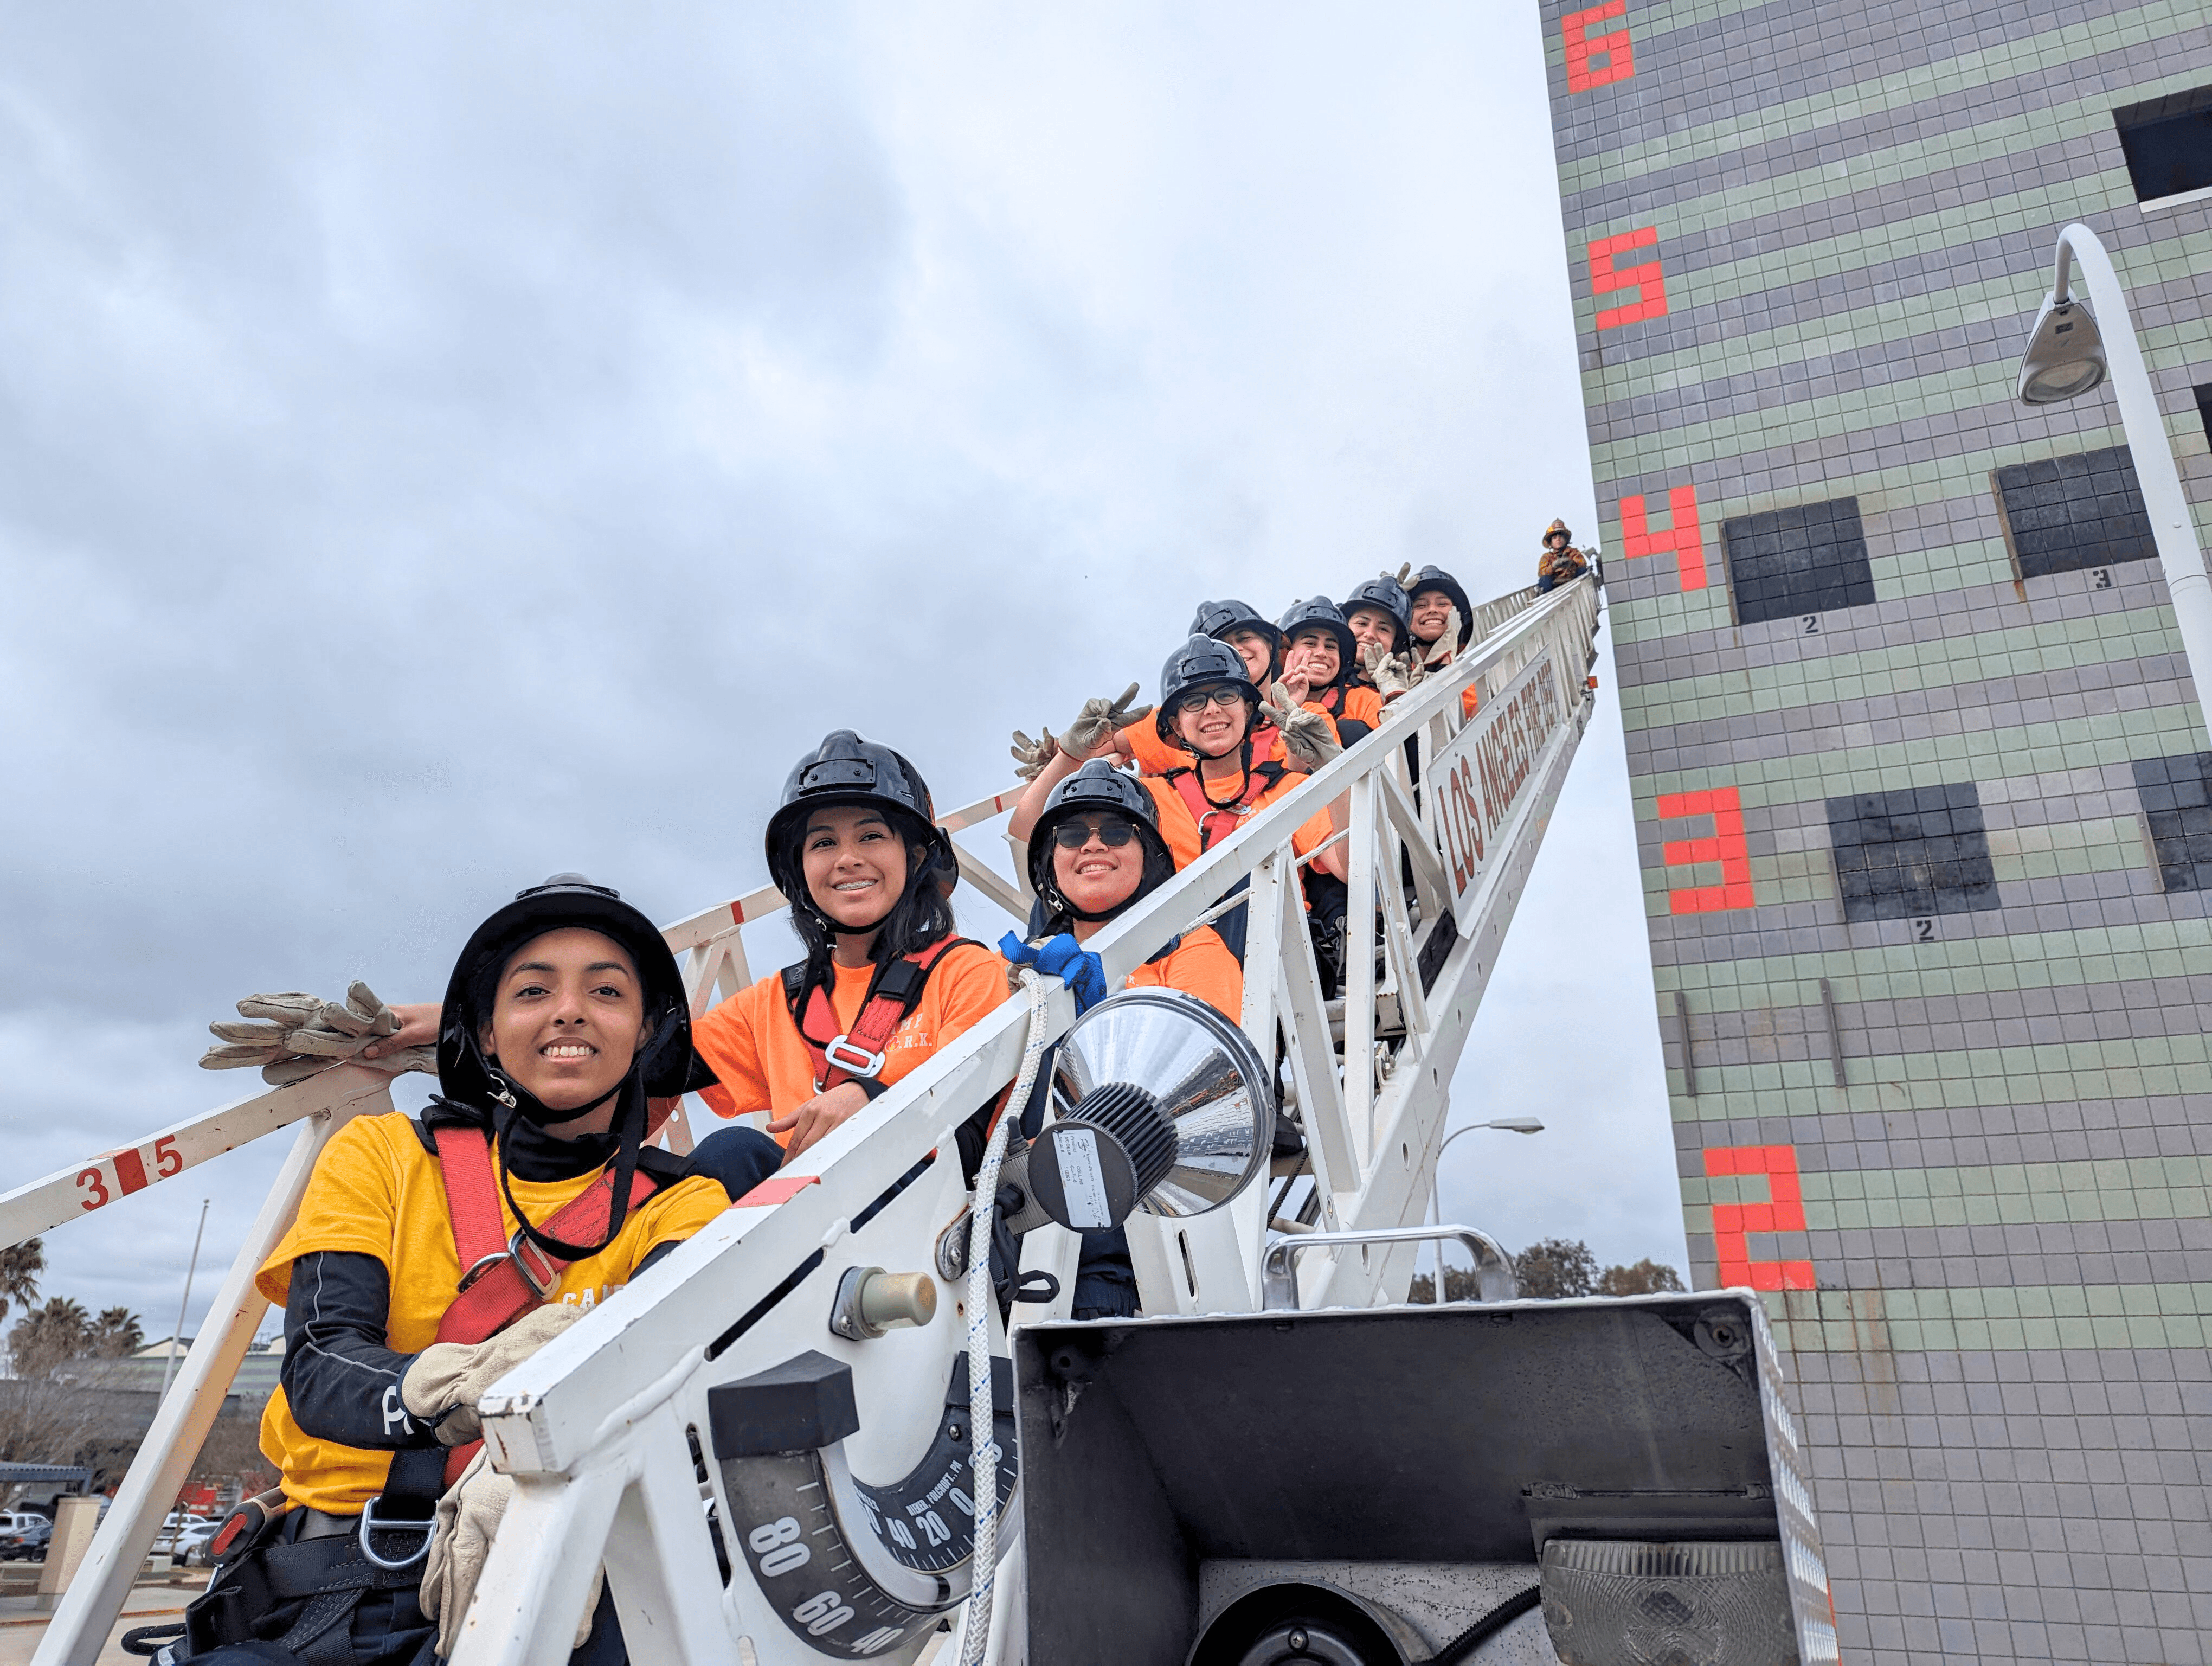 Members of one of the Camp S.P.A.R.K. teams smiling seated on an LAFD aerial ladder.